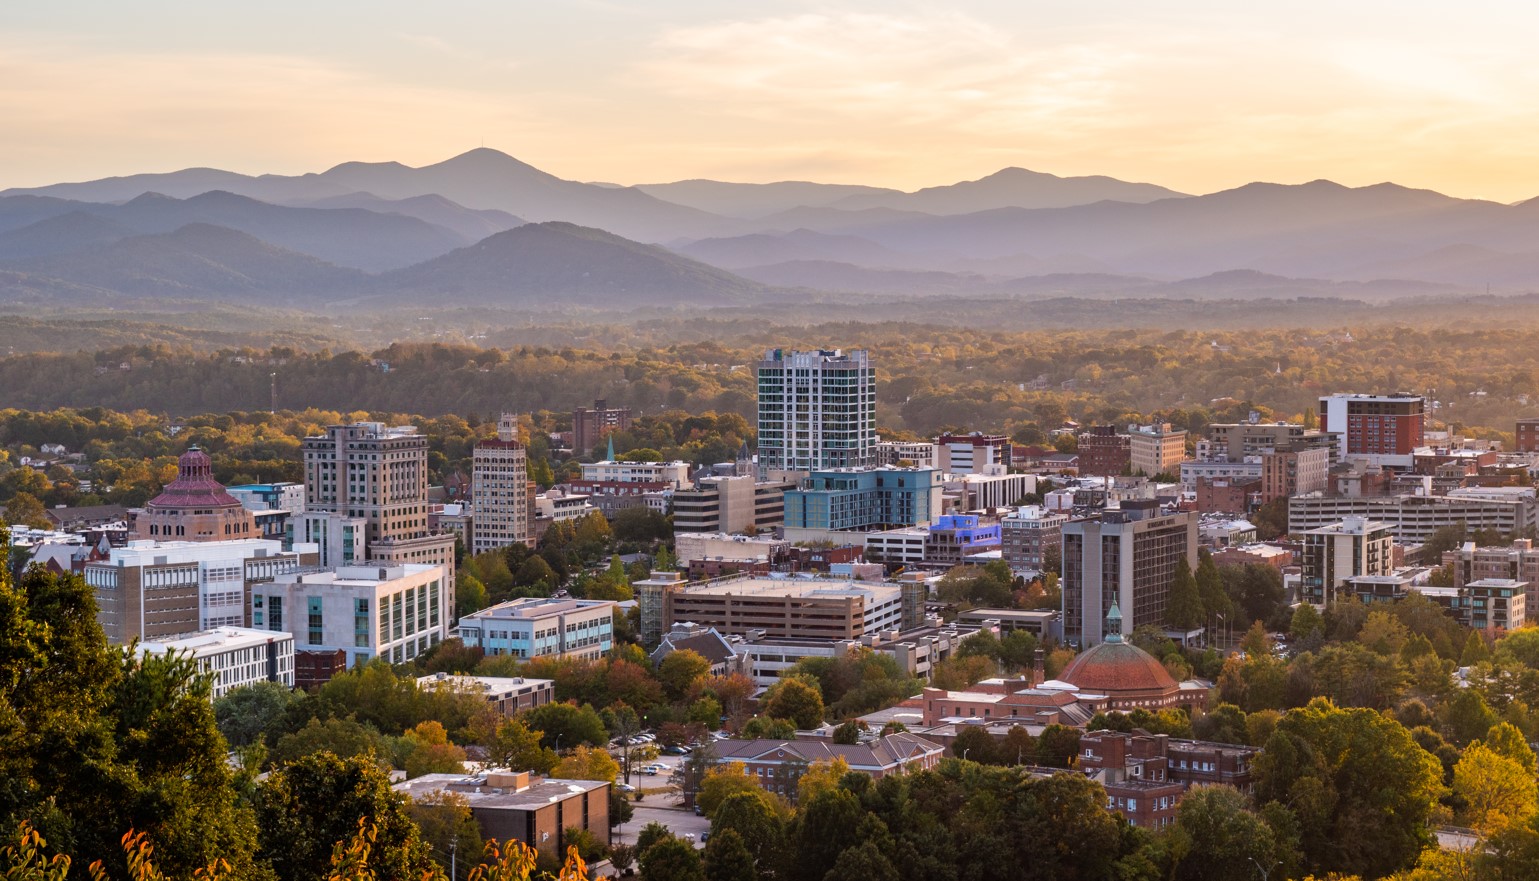 Downtown Asheville with the Blue Ridge Mountains in the background